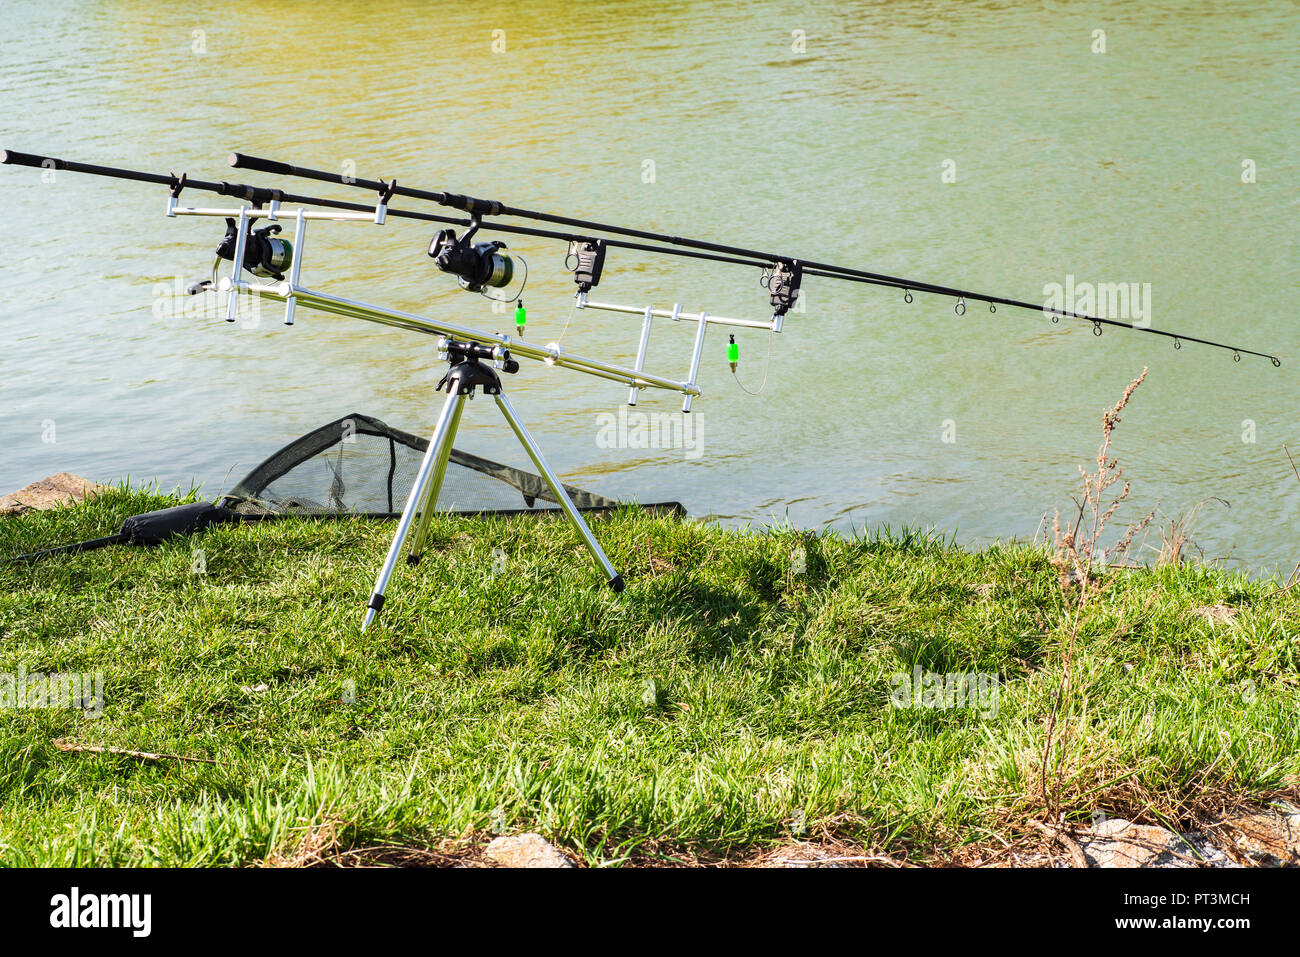 The Fishing Rod Is Set On The River Bank Stock Photo Alamy, 58% OFF